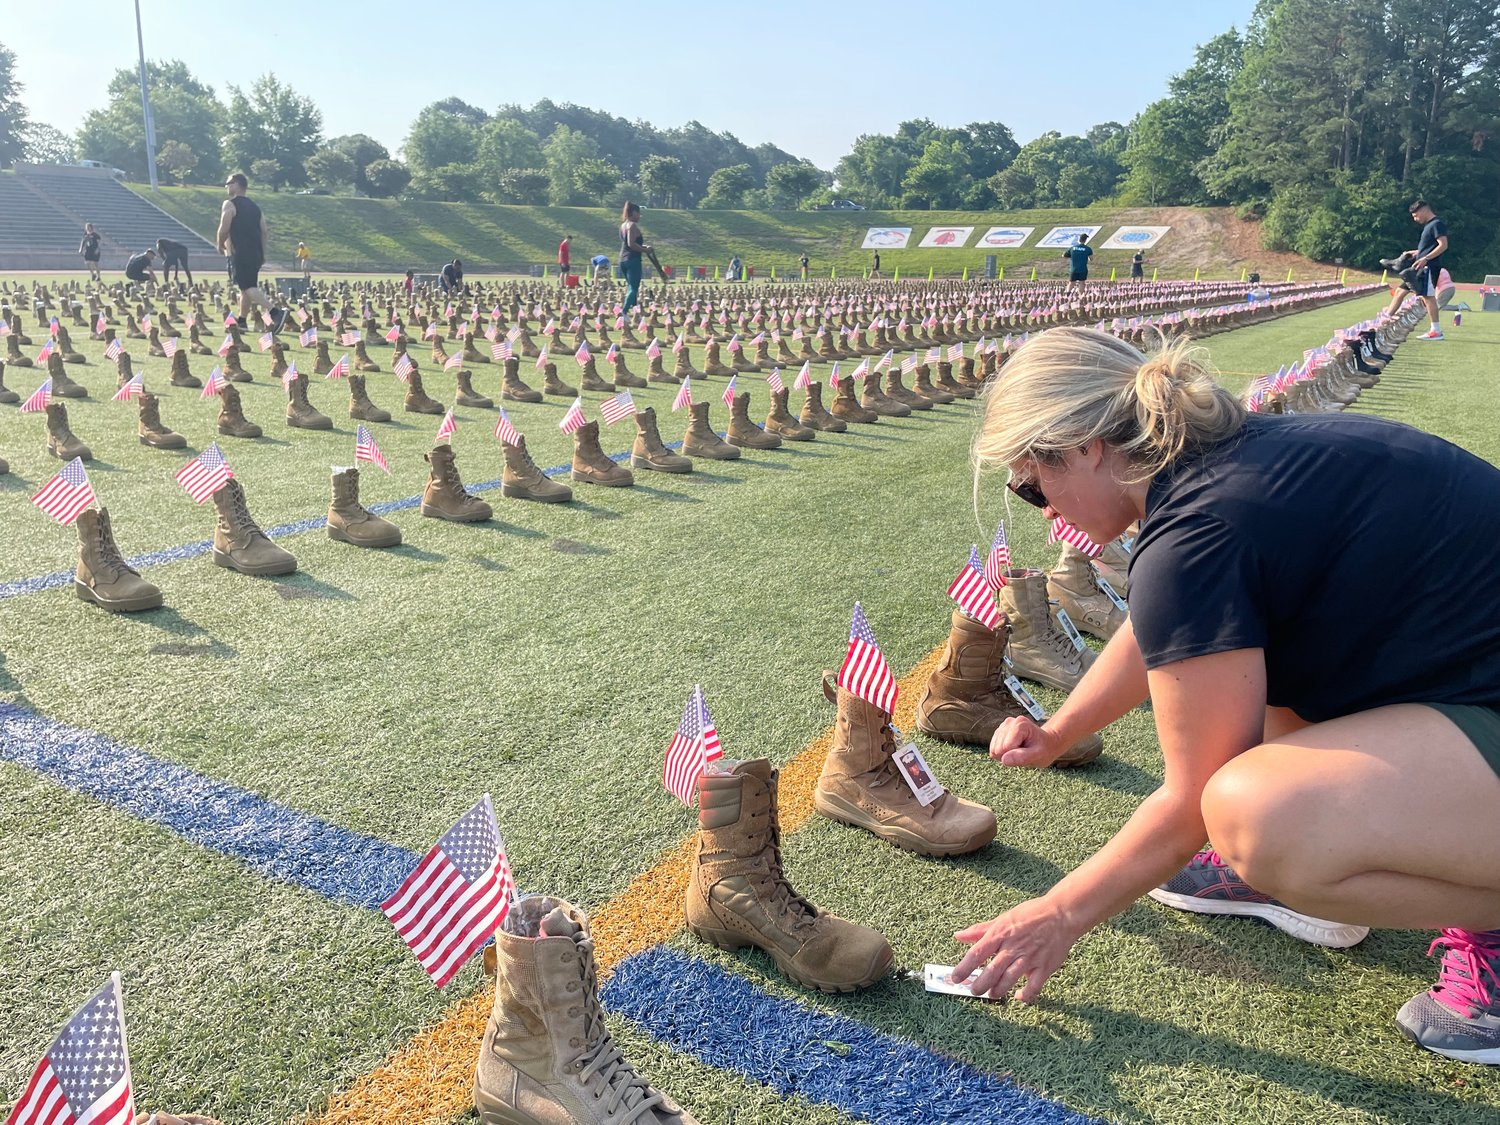 Anna Waggoner helps set up boots that are part of a memorial to fallen service members on display at Hedrick Stadium on Fort Bragg until Monday.